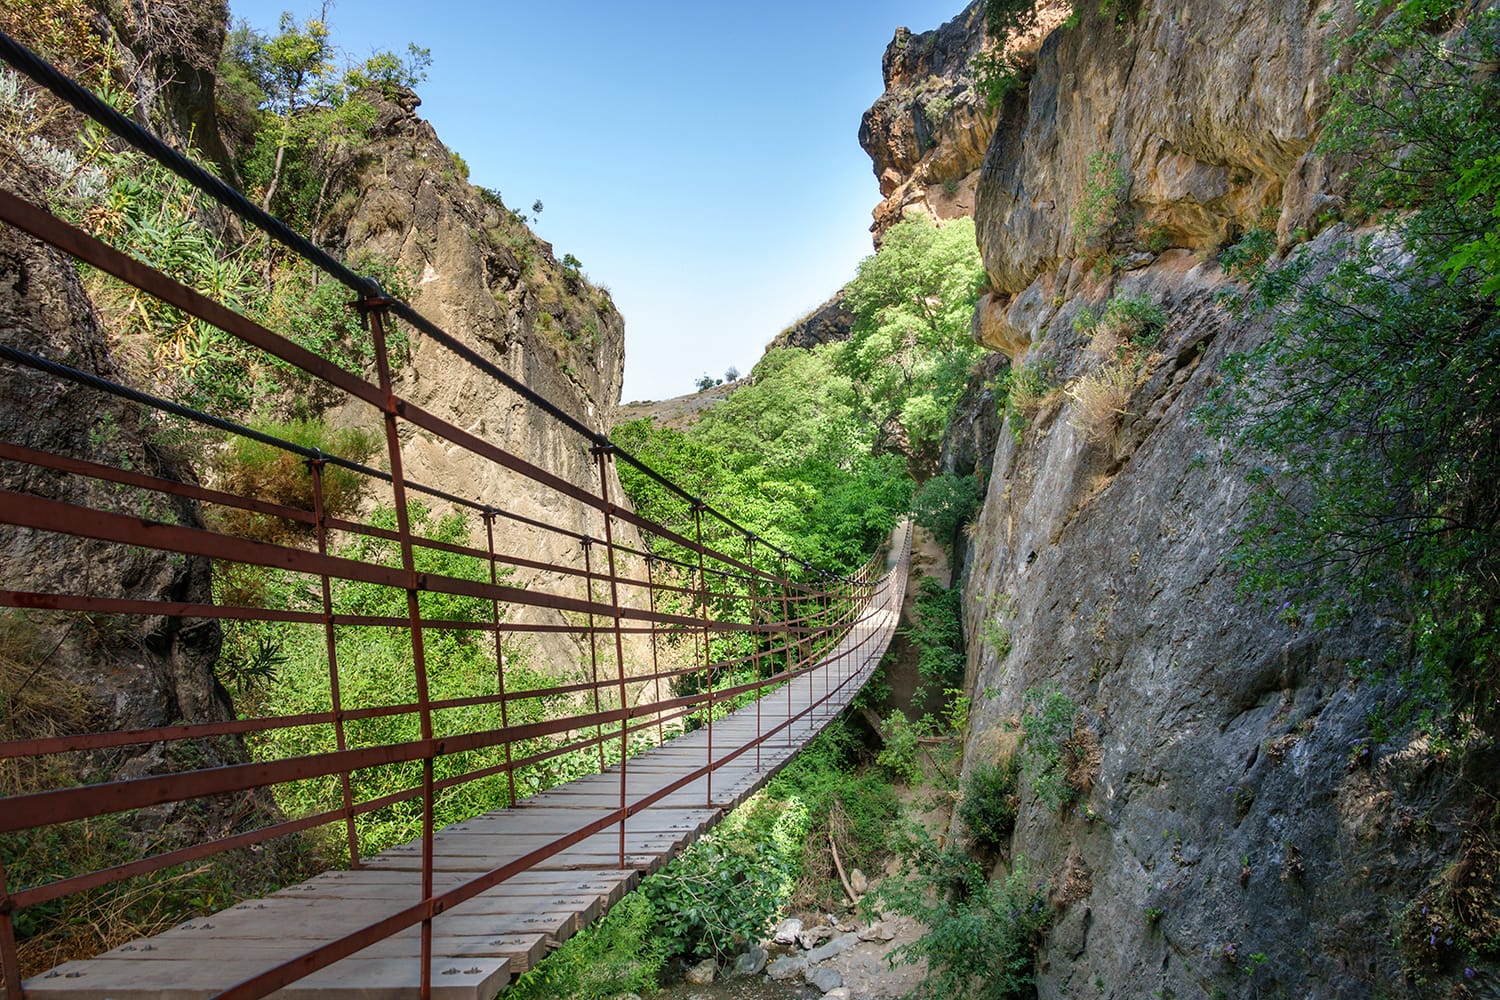 Wide angle view of rope bridge over a canyon in Cahorros, Granada, Andalusia, Spain